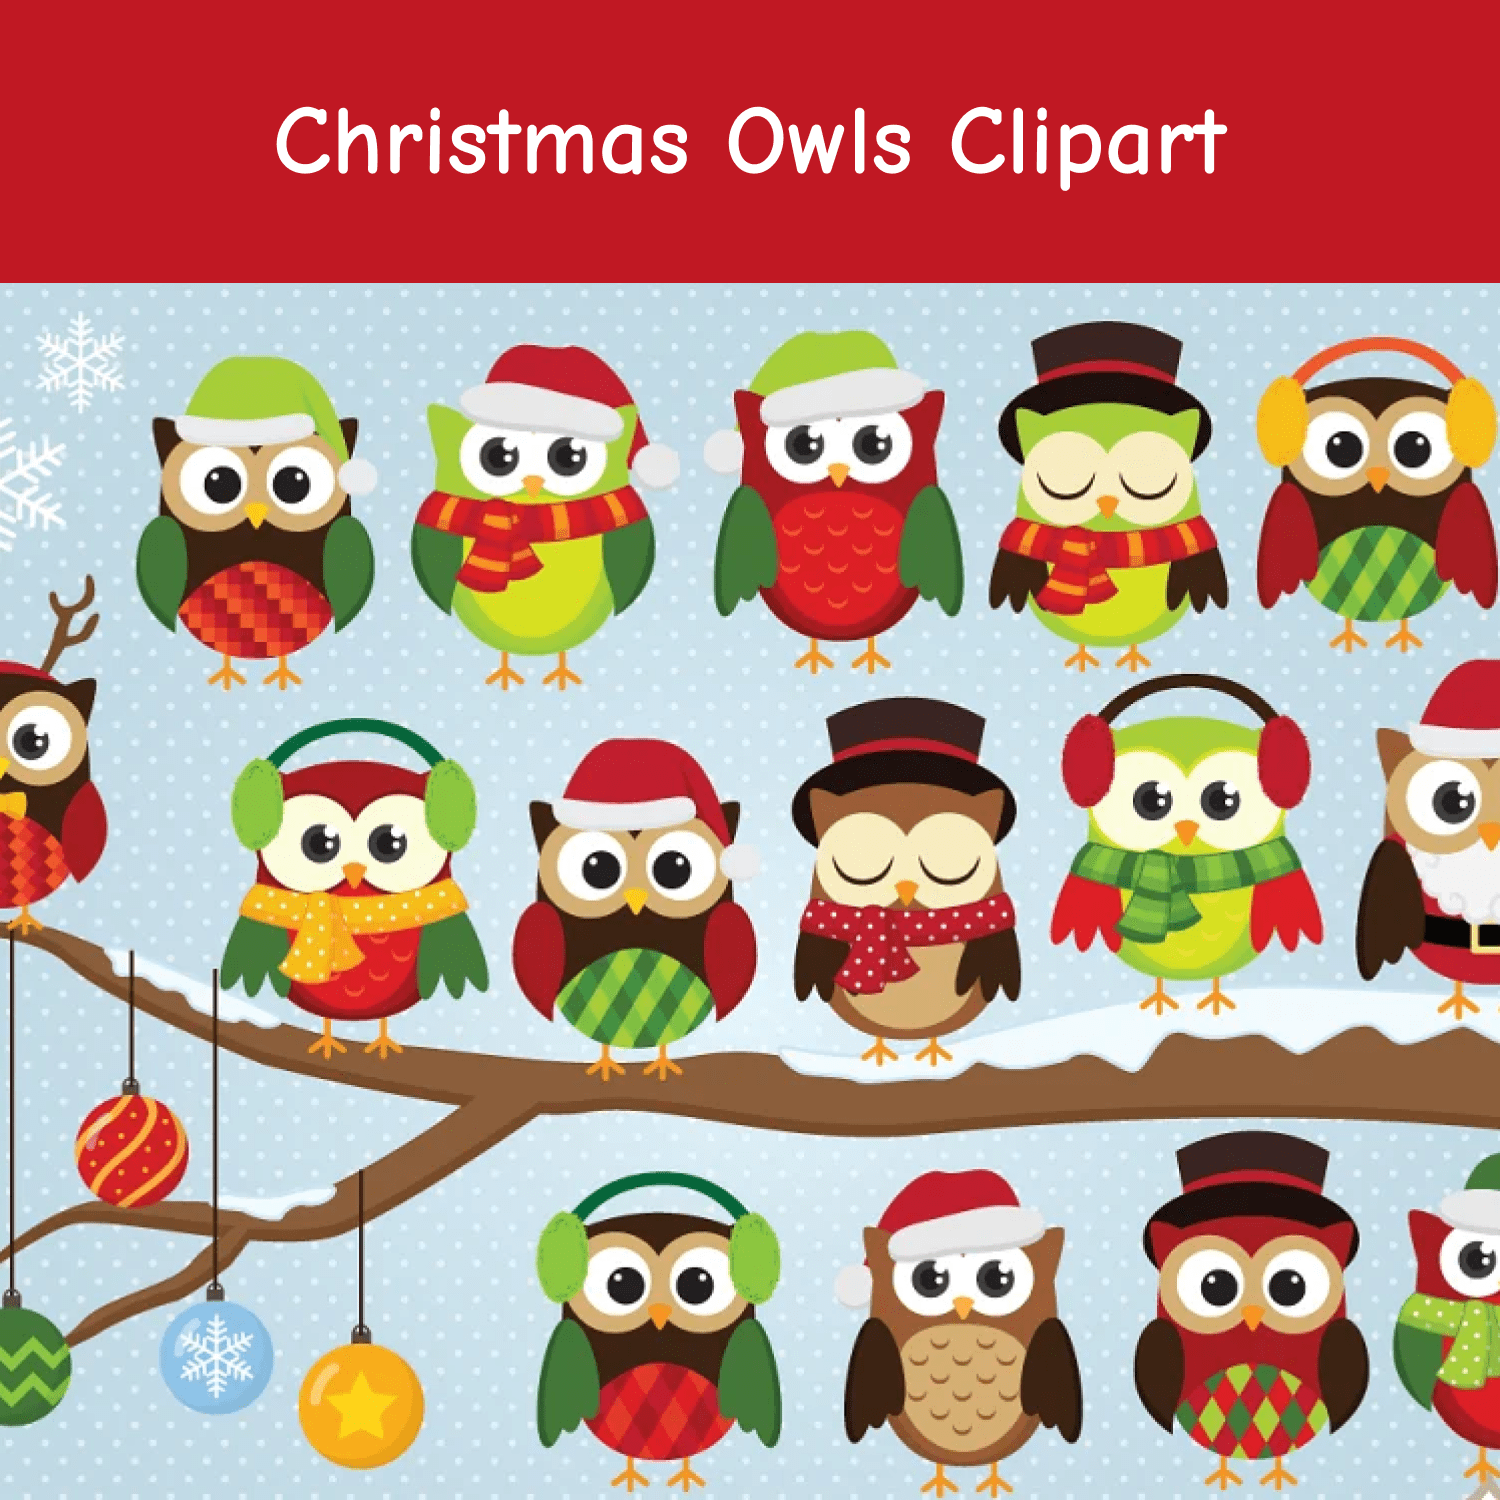 Christmas Owls Clipart cover.